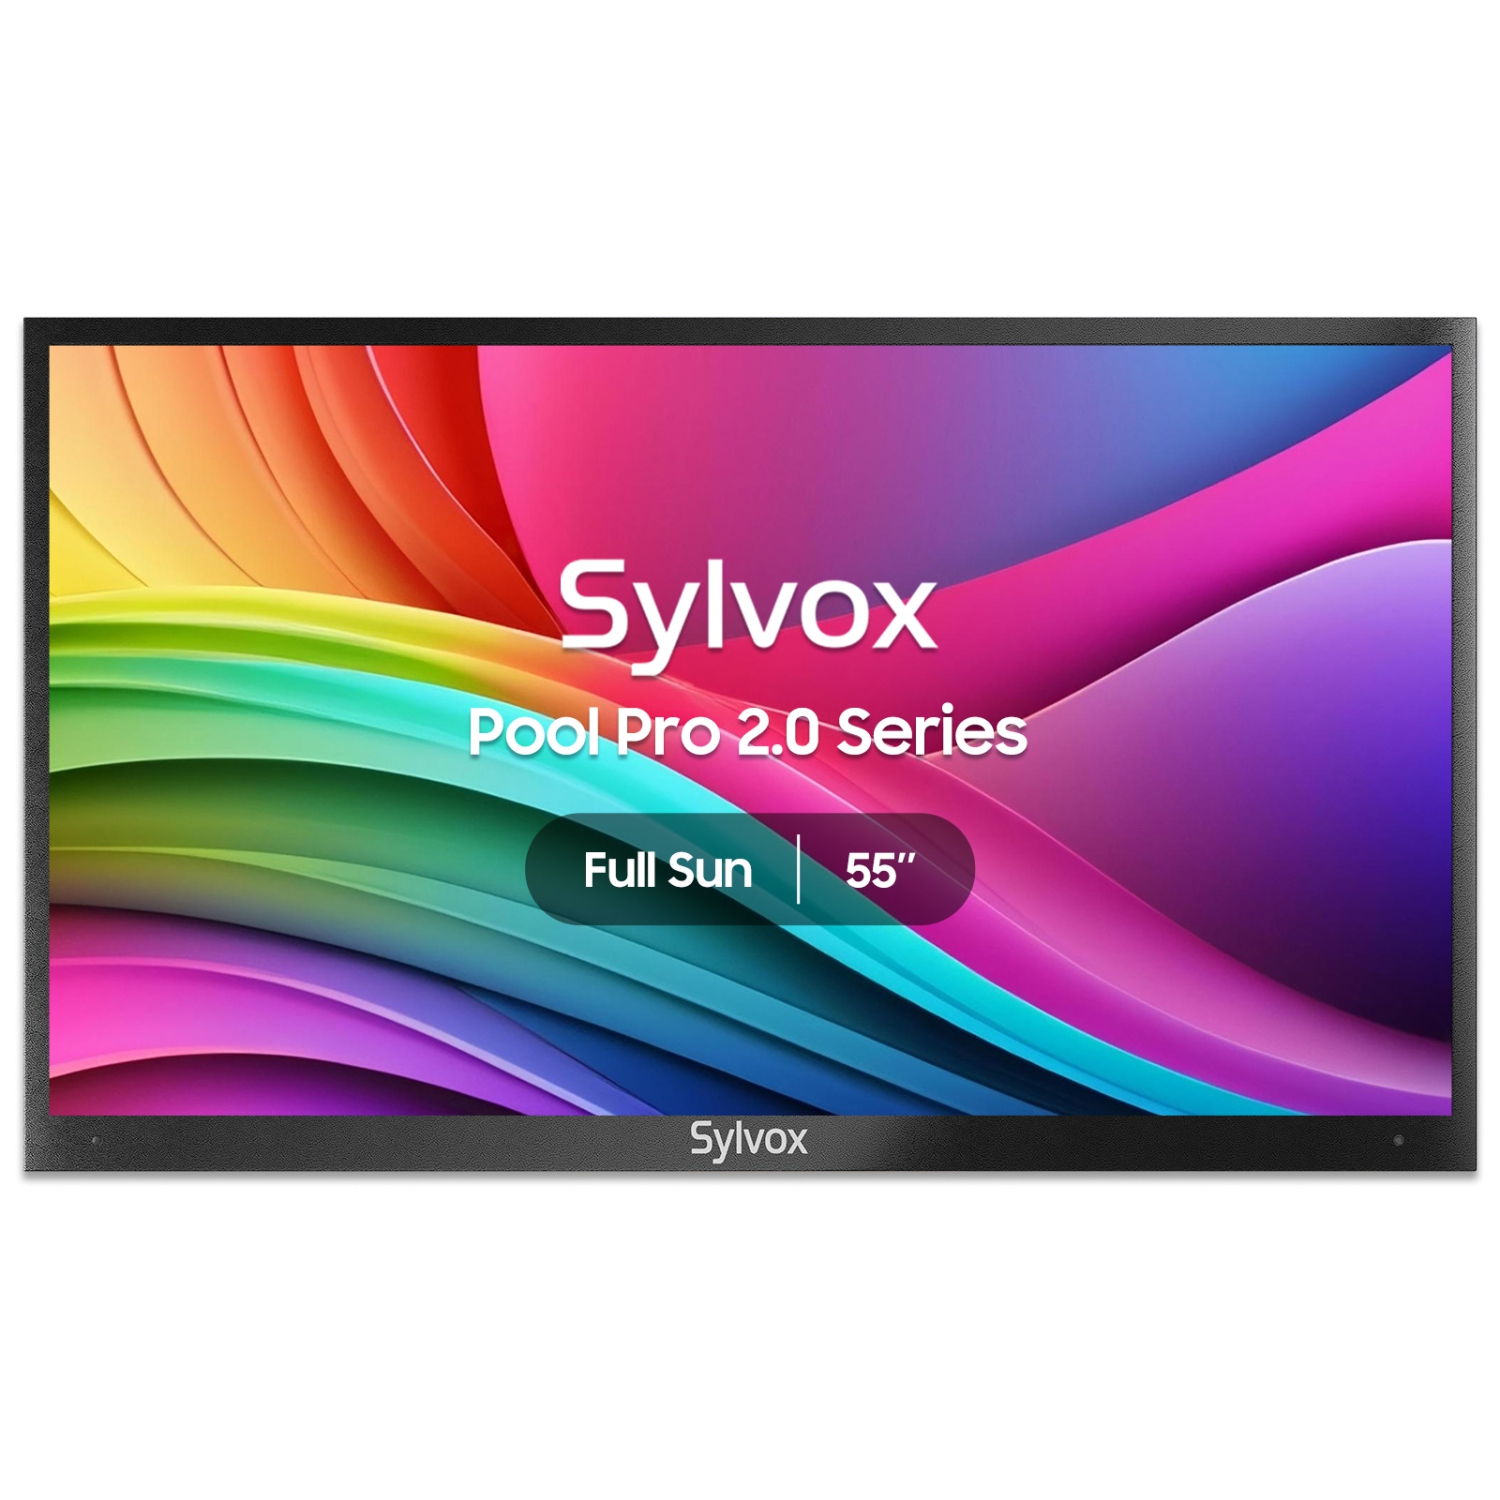 SYLVOX Outdoor TV, 55" Full Sun Smart Outdoor TV, IP55 Waterproof, Voice Remote, 2000nits Weatherproof Television, Google Assistant Chromecast(Pool Pro 2.0)